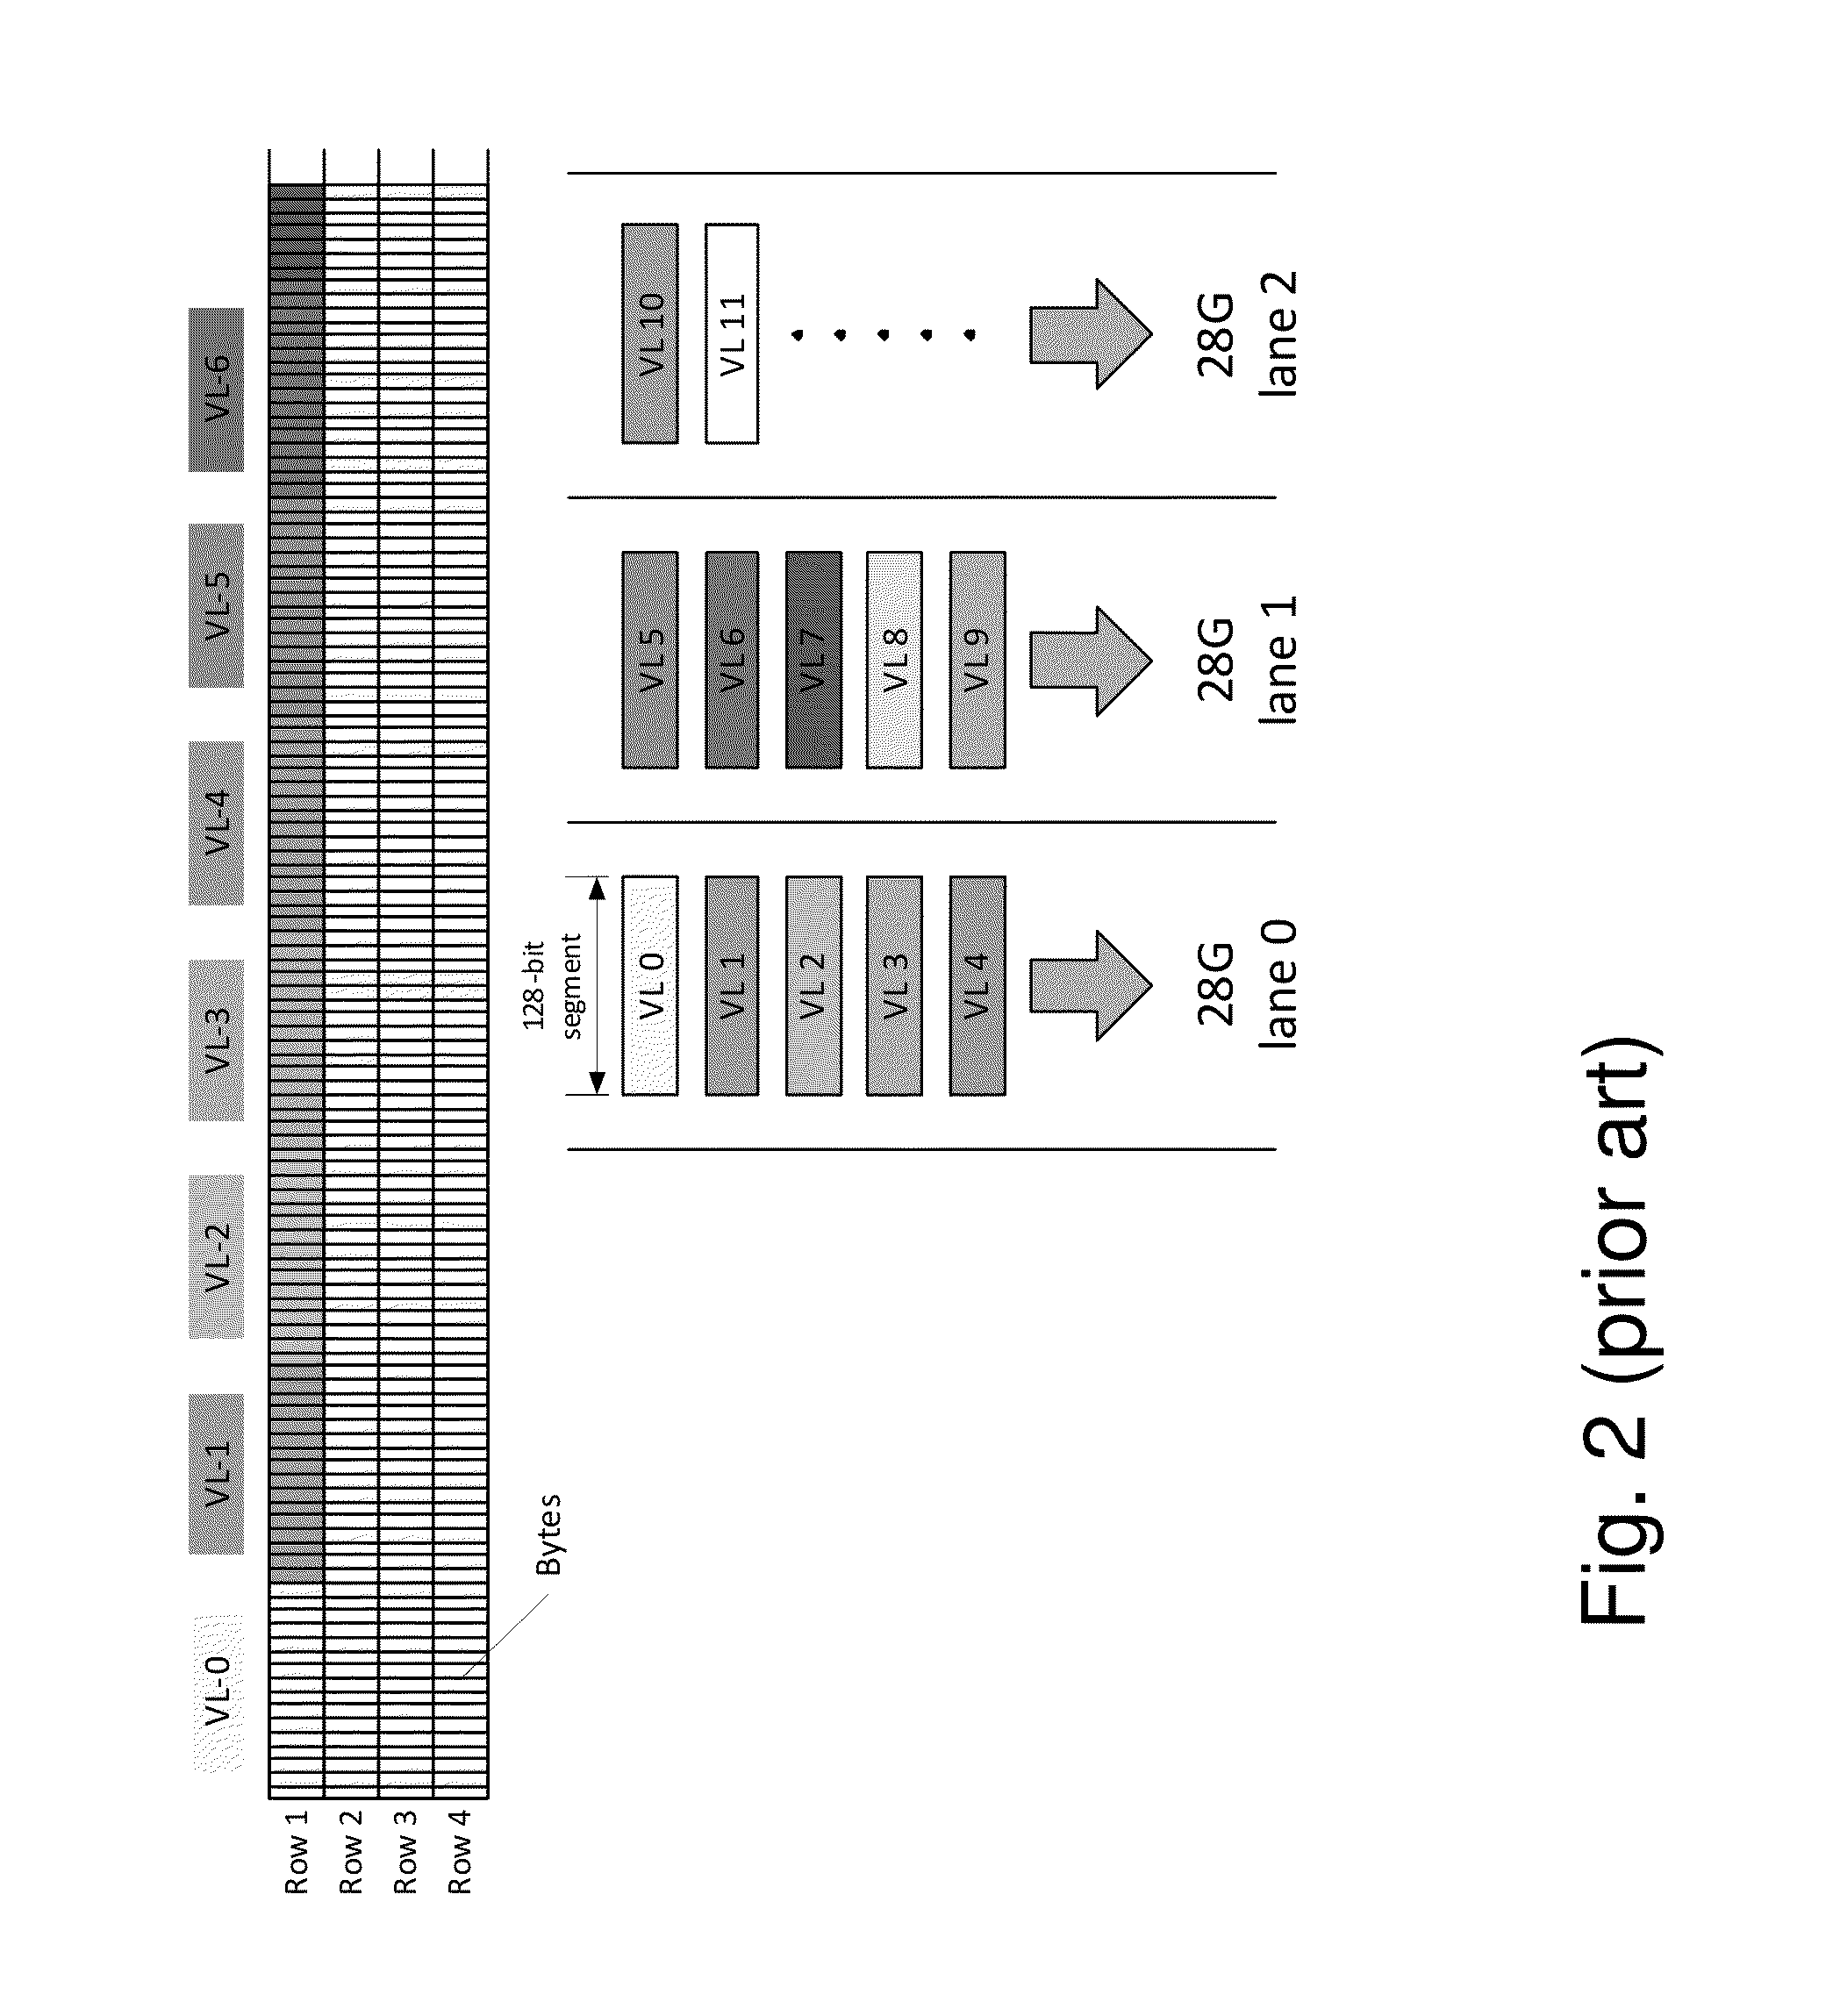 Method for increasing the probability of error correction in an optical communication channel